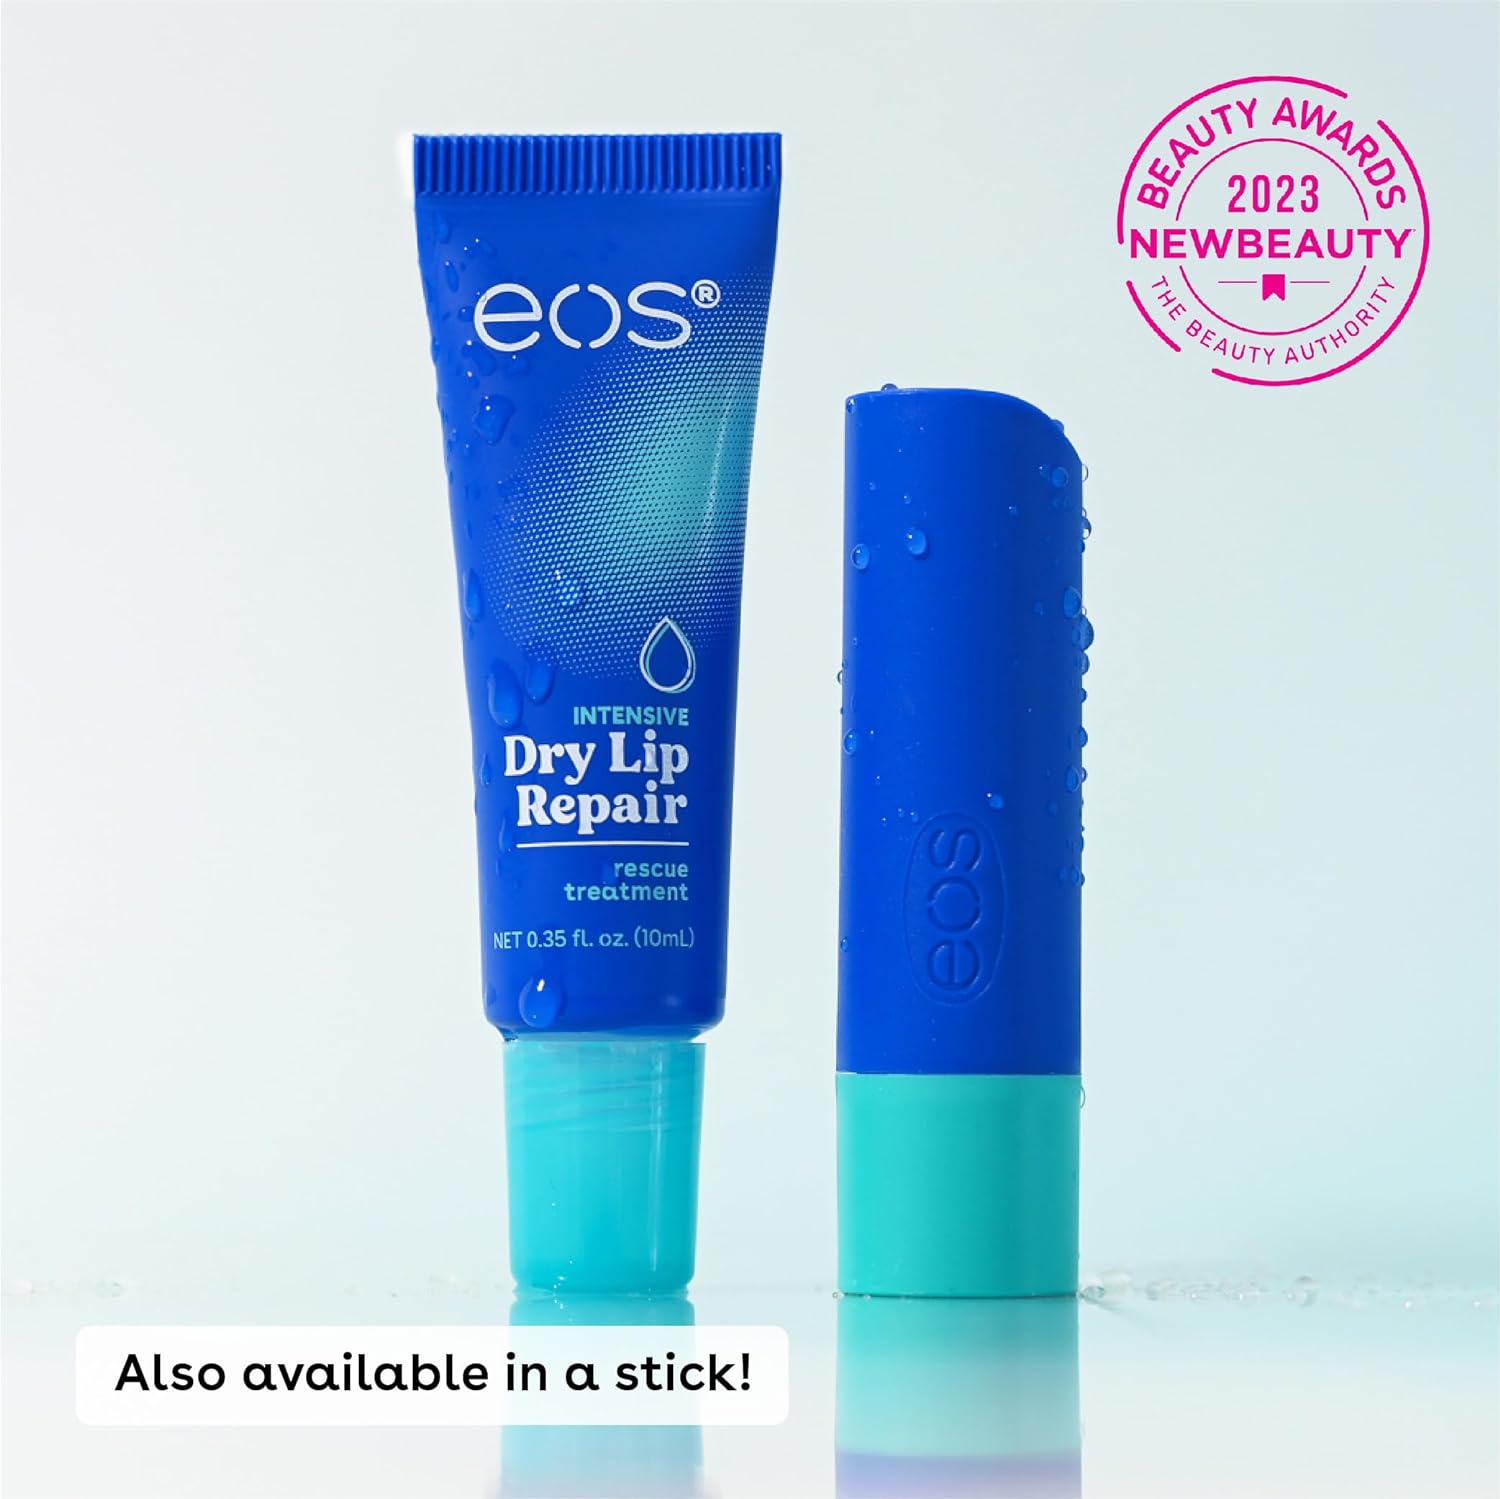 eos The Hero Lip Repair, Extra Dry Lip Treatment, 24HR Moisture, Natural Strawberry Extract, 0.35 fl oz, 2 Count (Pack of 1) : Beauty & Personal Care